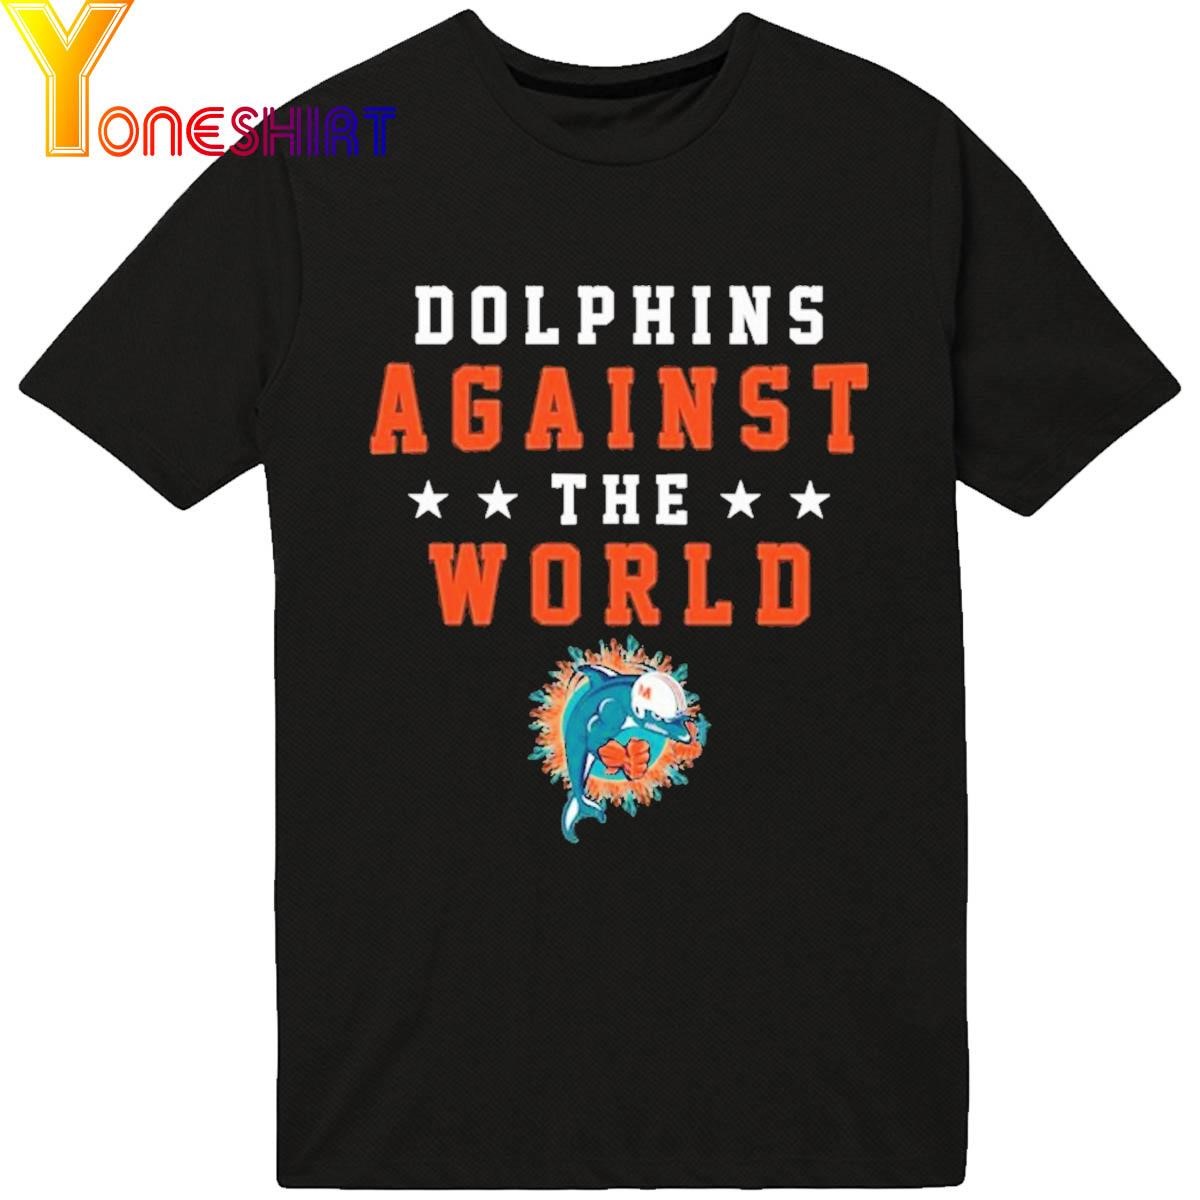 Dolphins Against The World Shirt